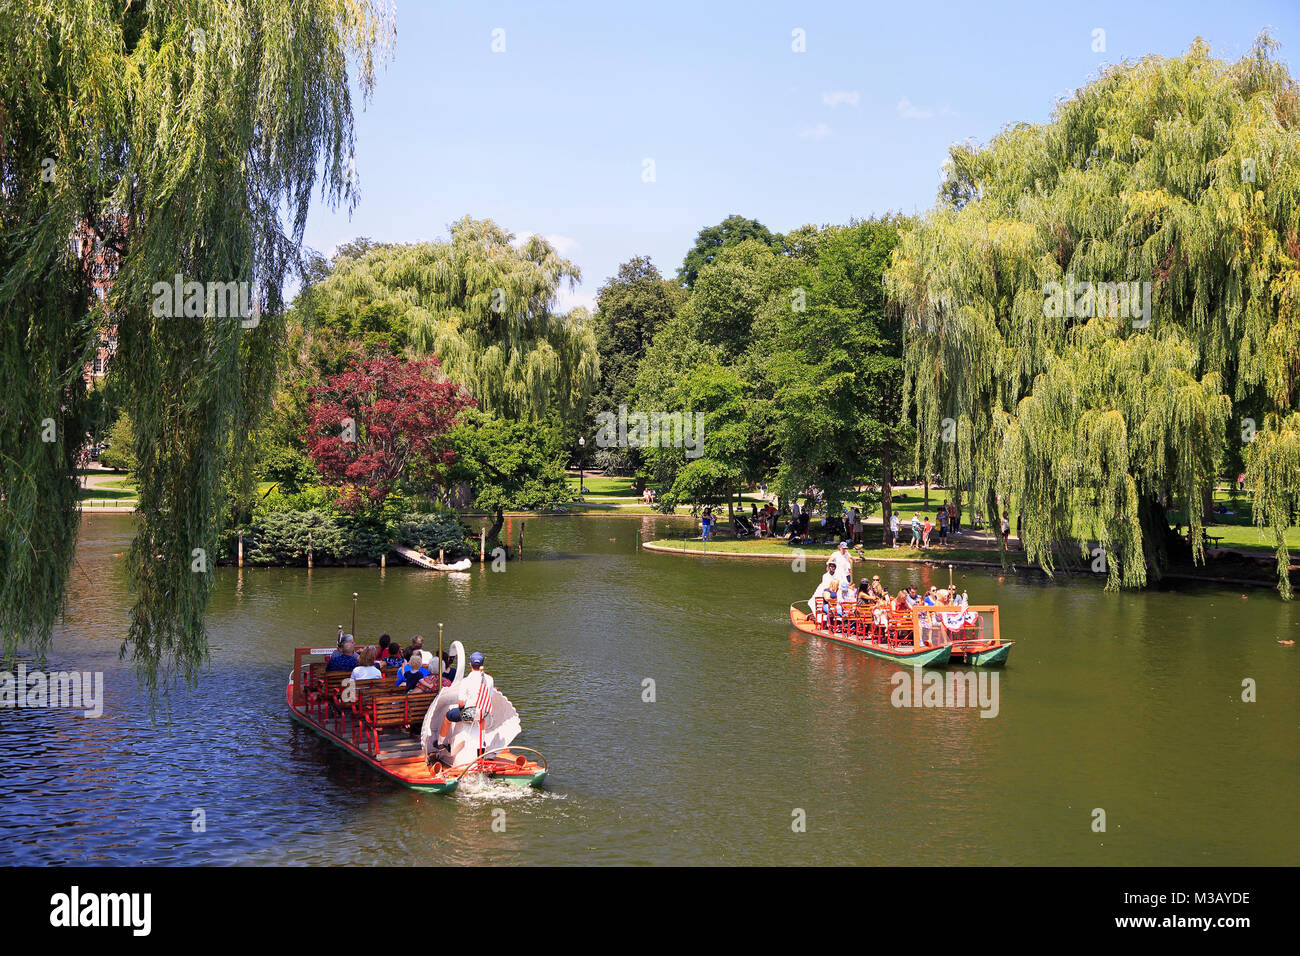 Tourists riding and enjoying Swan boats on the lake, Public Garden in Boston. The boats have been in operation since 1877. Stock Photo